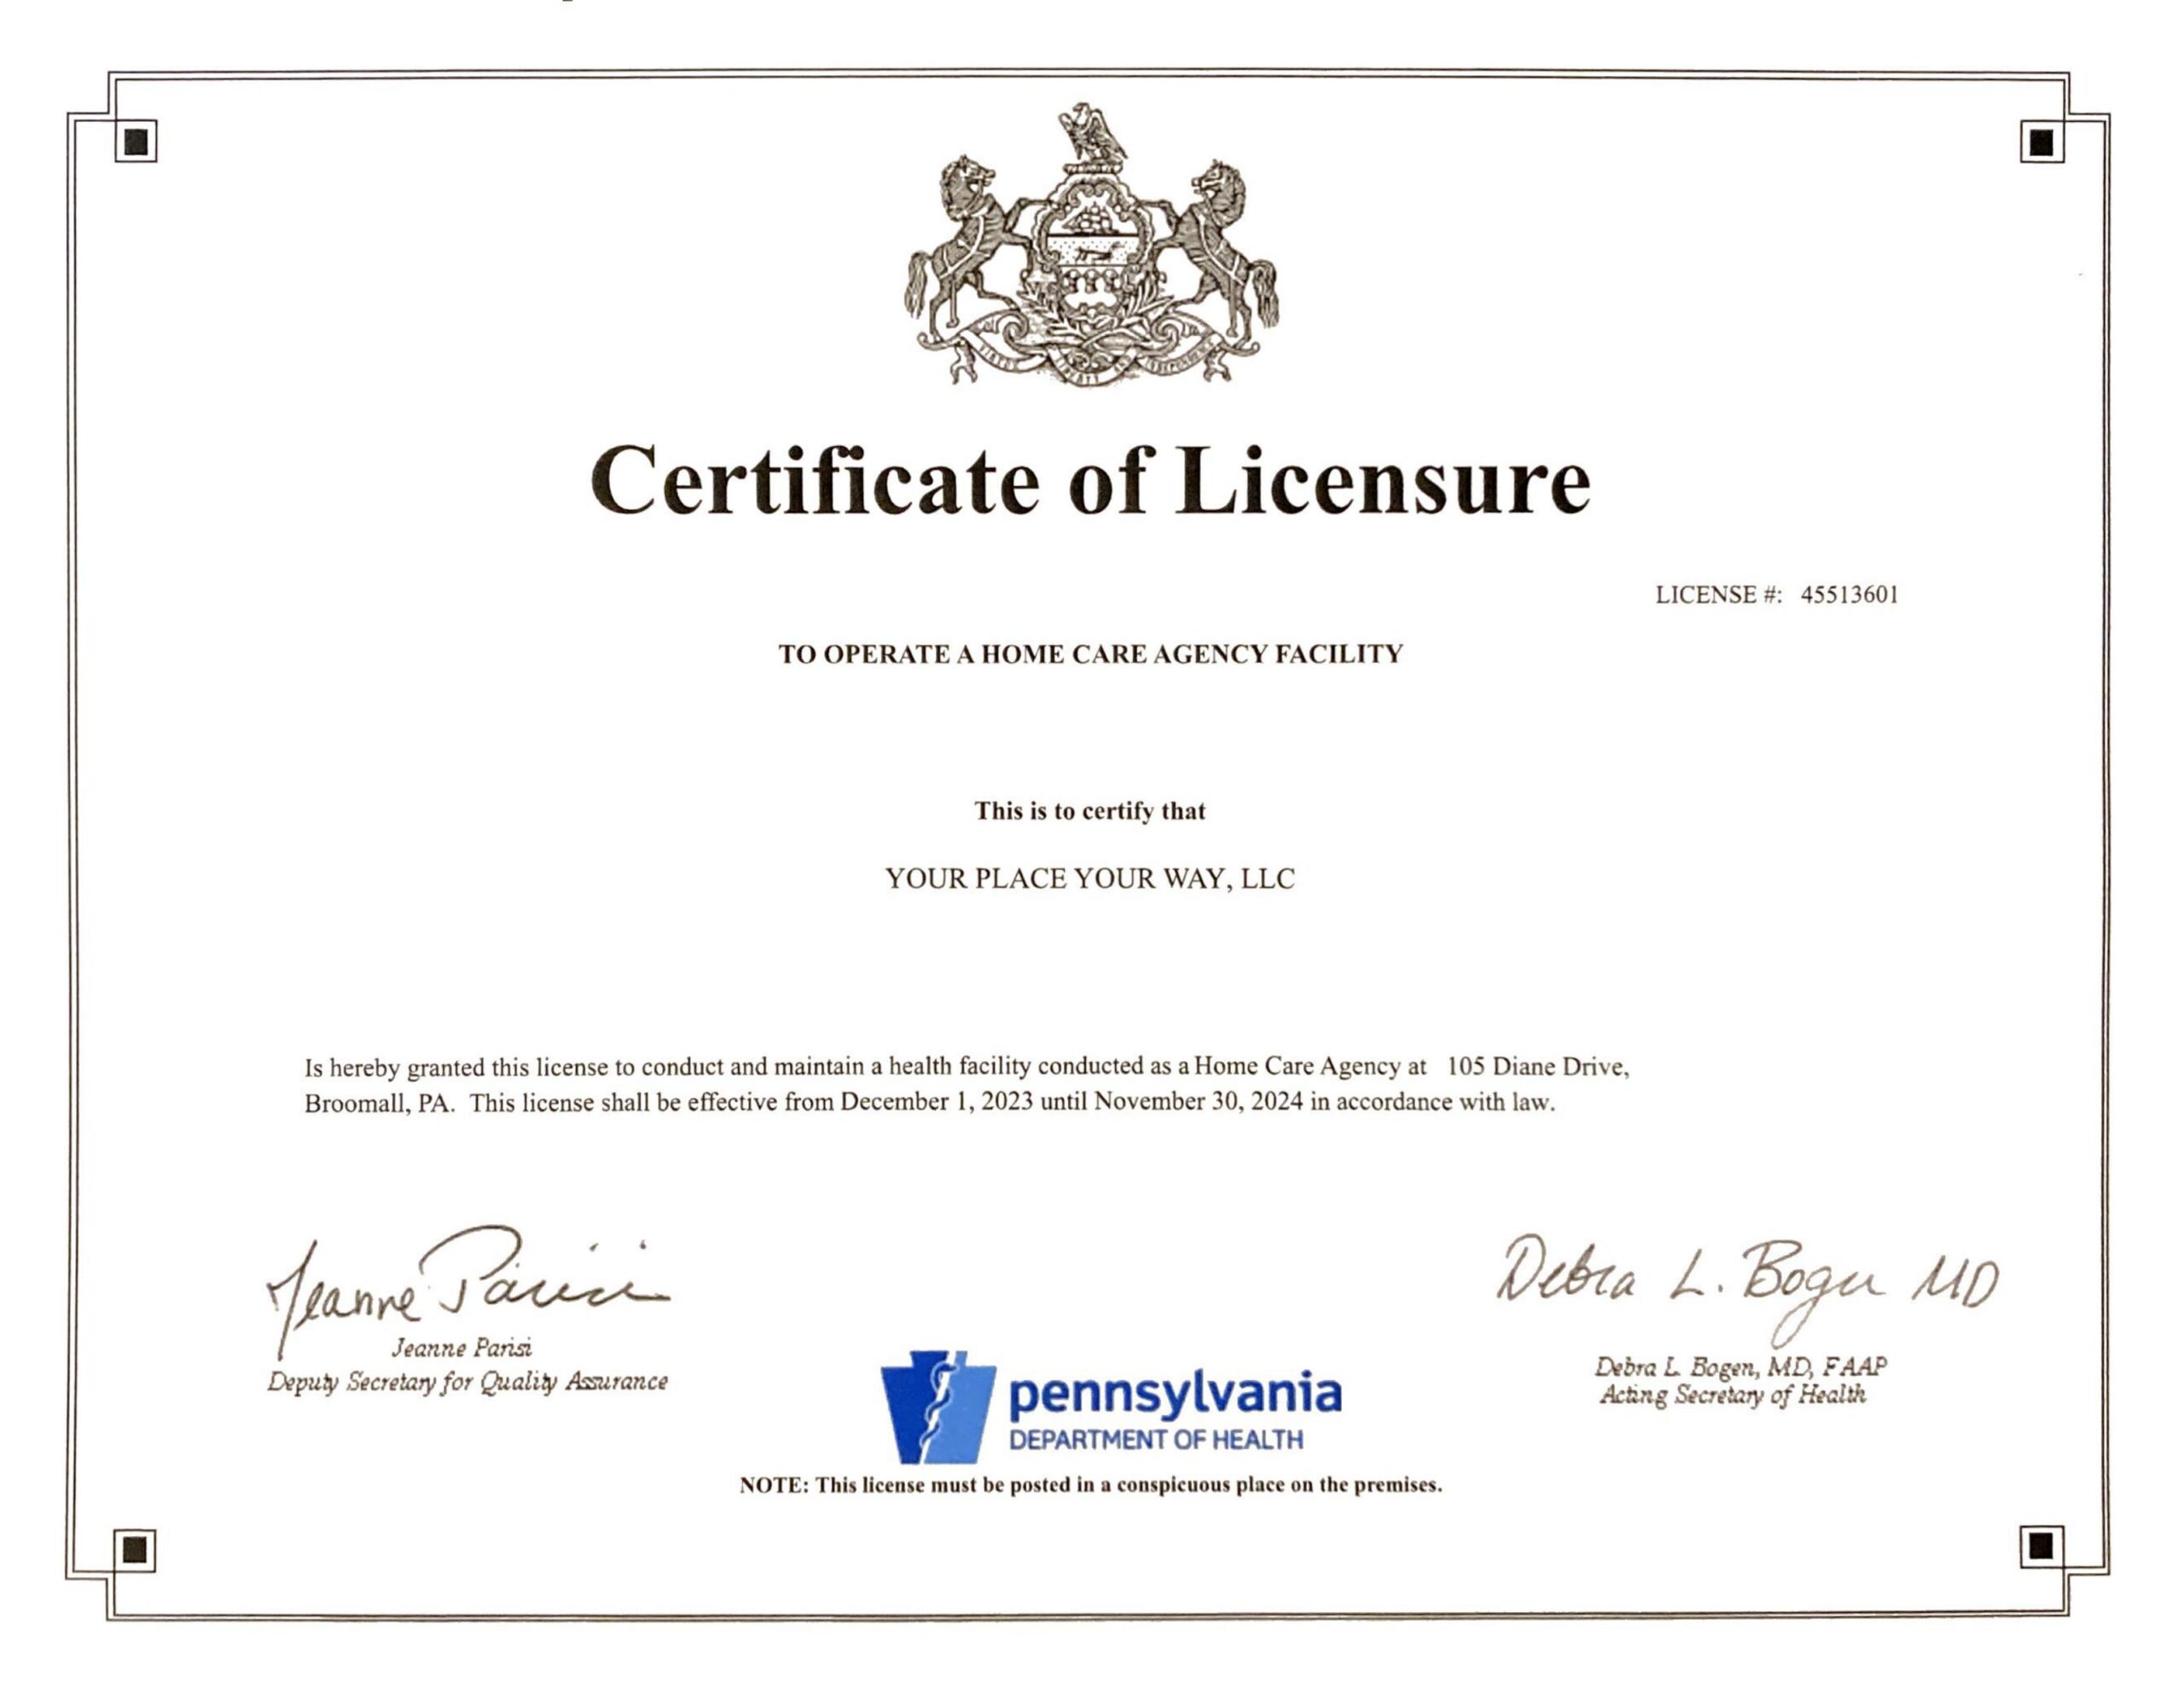 Certificate of Licensure with signature